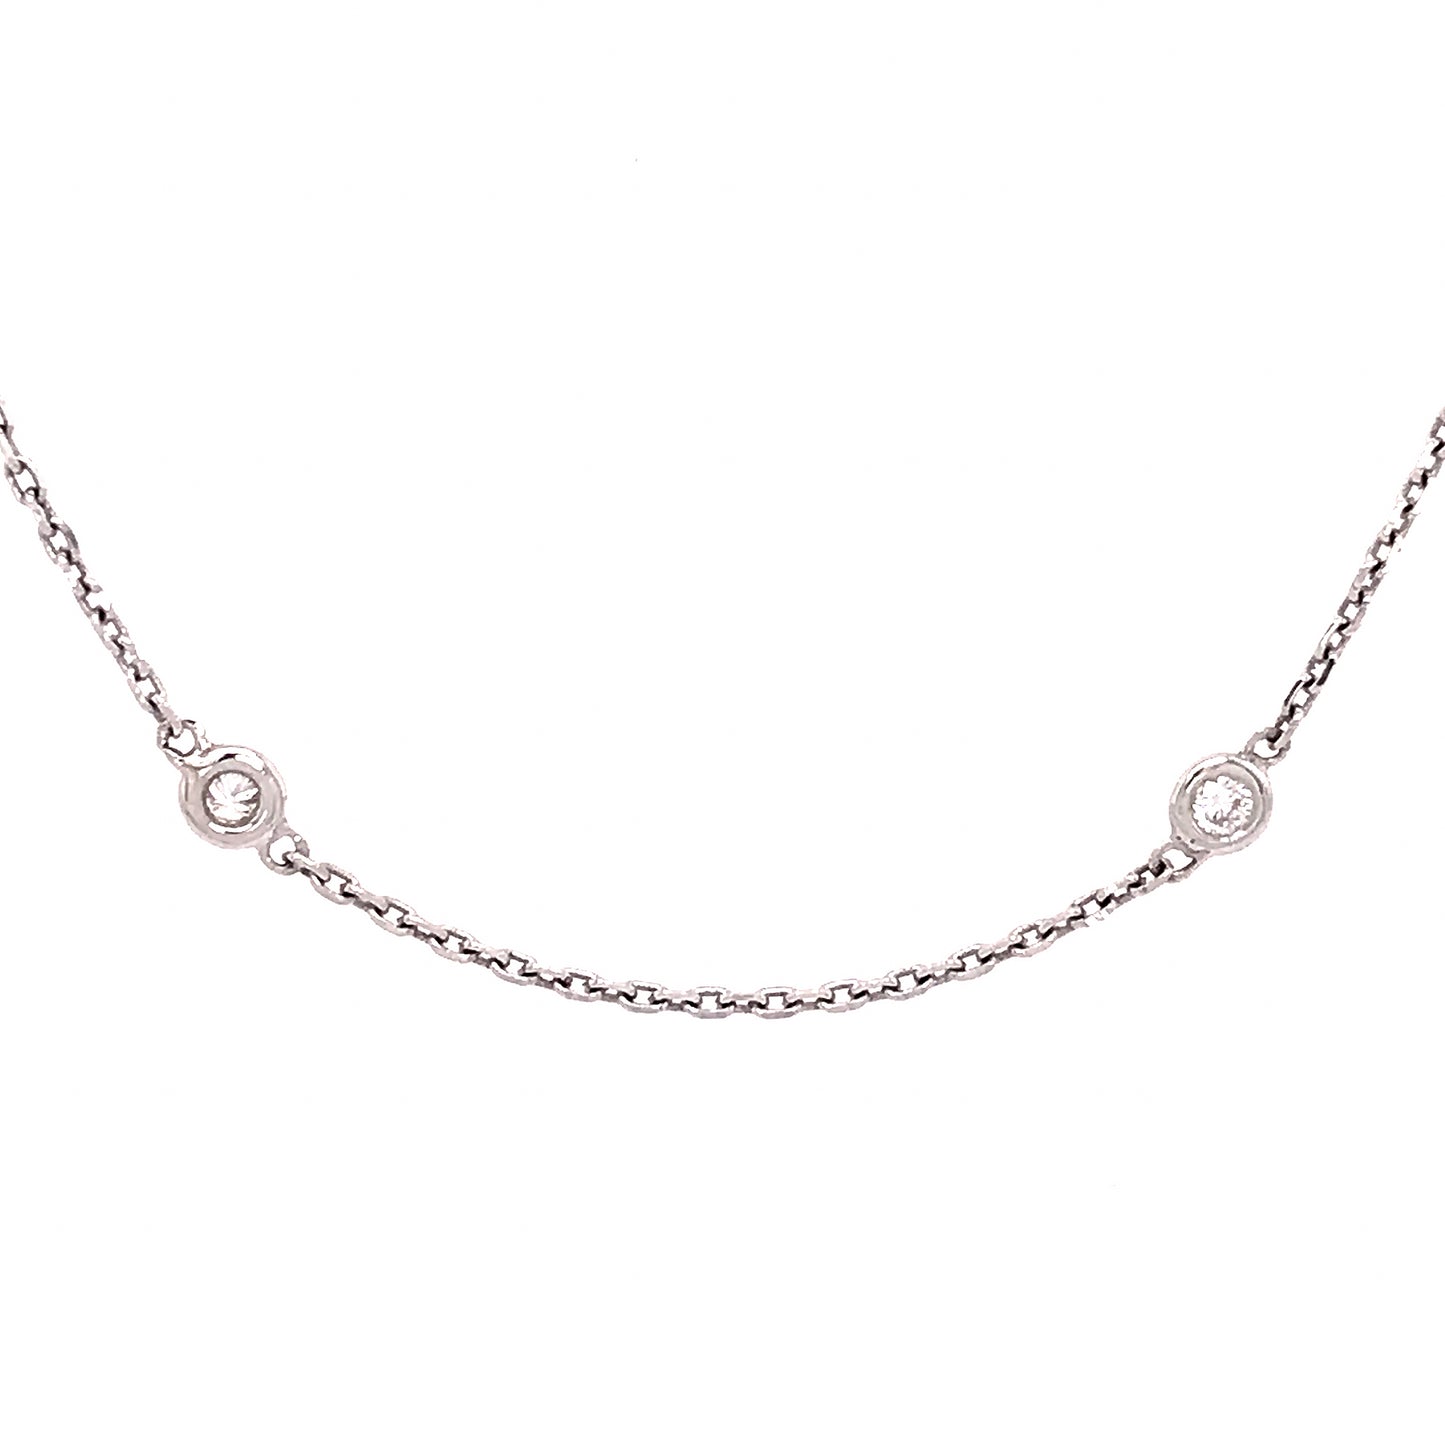 Tiffany and Co. Elsa Peretti Diamond by the Yard Necklace